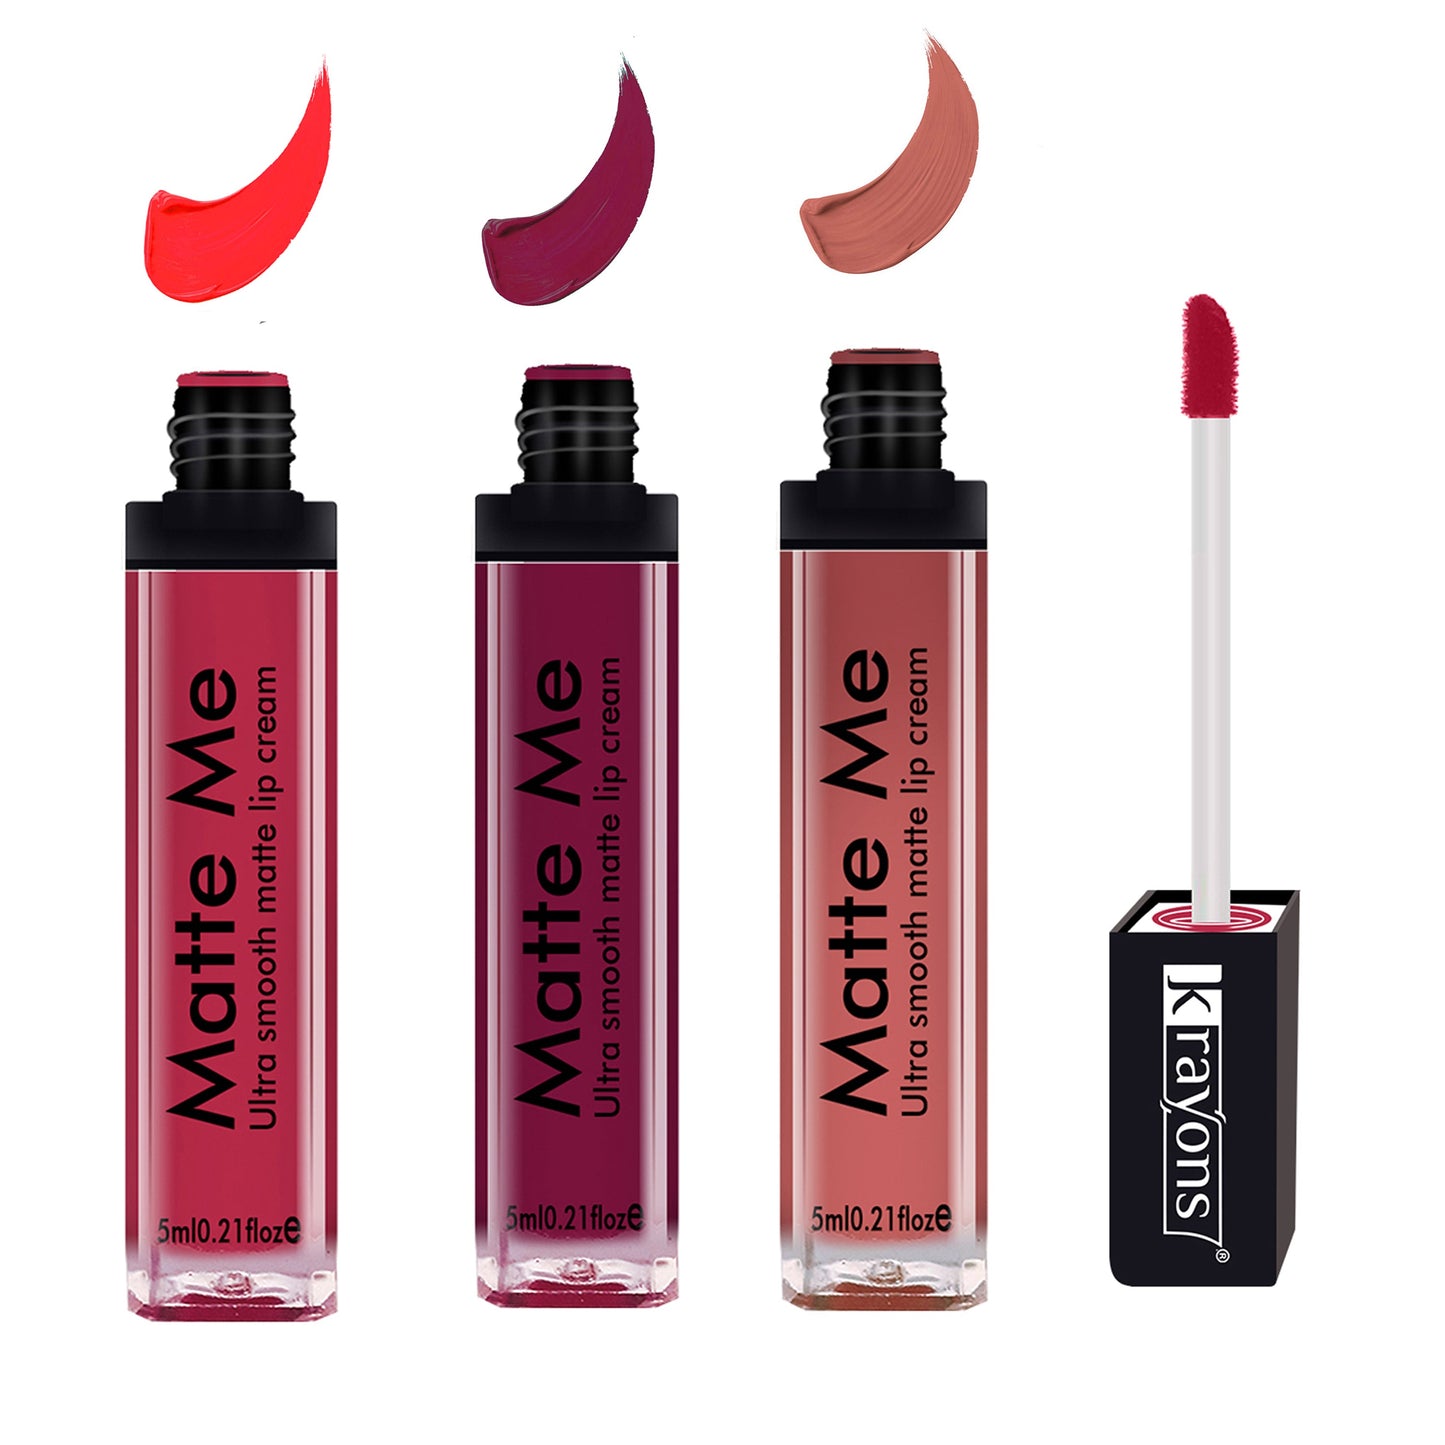 Krayons Matte Me Ultra Smooth Matte Liquid Lip Color, Mask Proof, Waterproof, Longlasting, 5ml Each, Combo, Pack of 3 (Sunset Orange, Wow Pink, Nude Embrace)